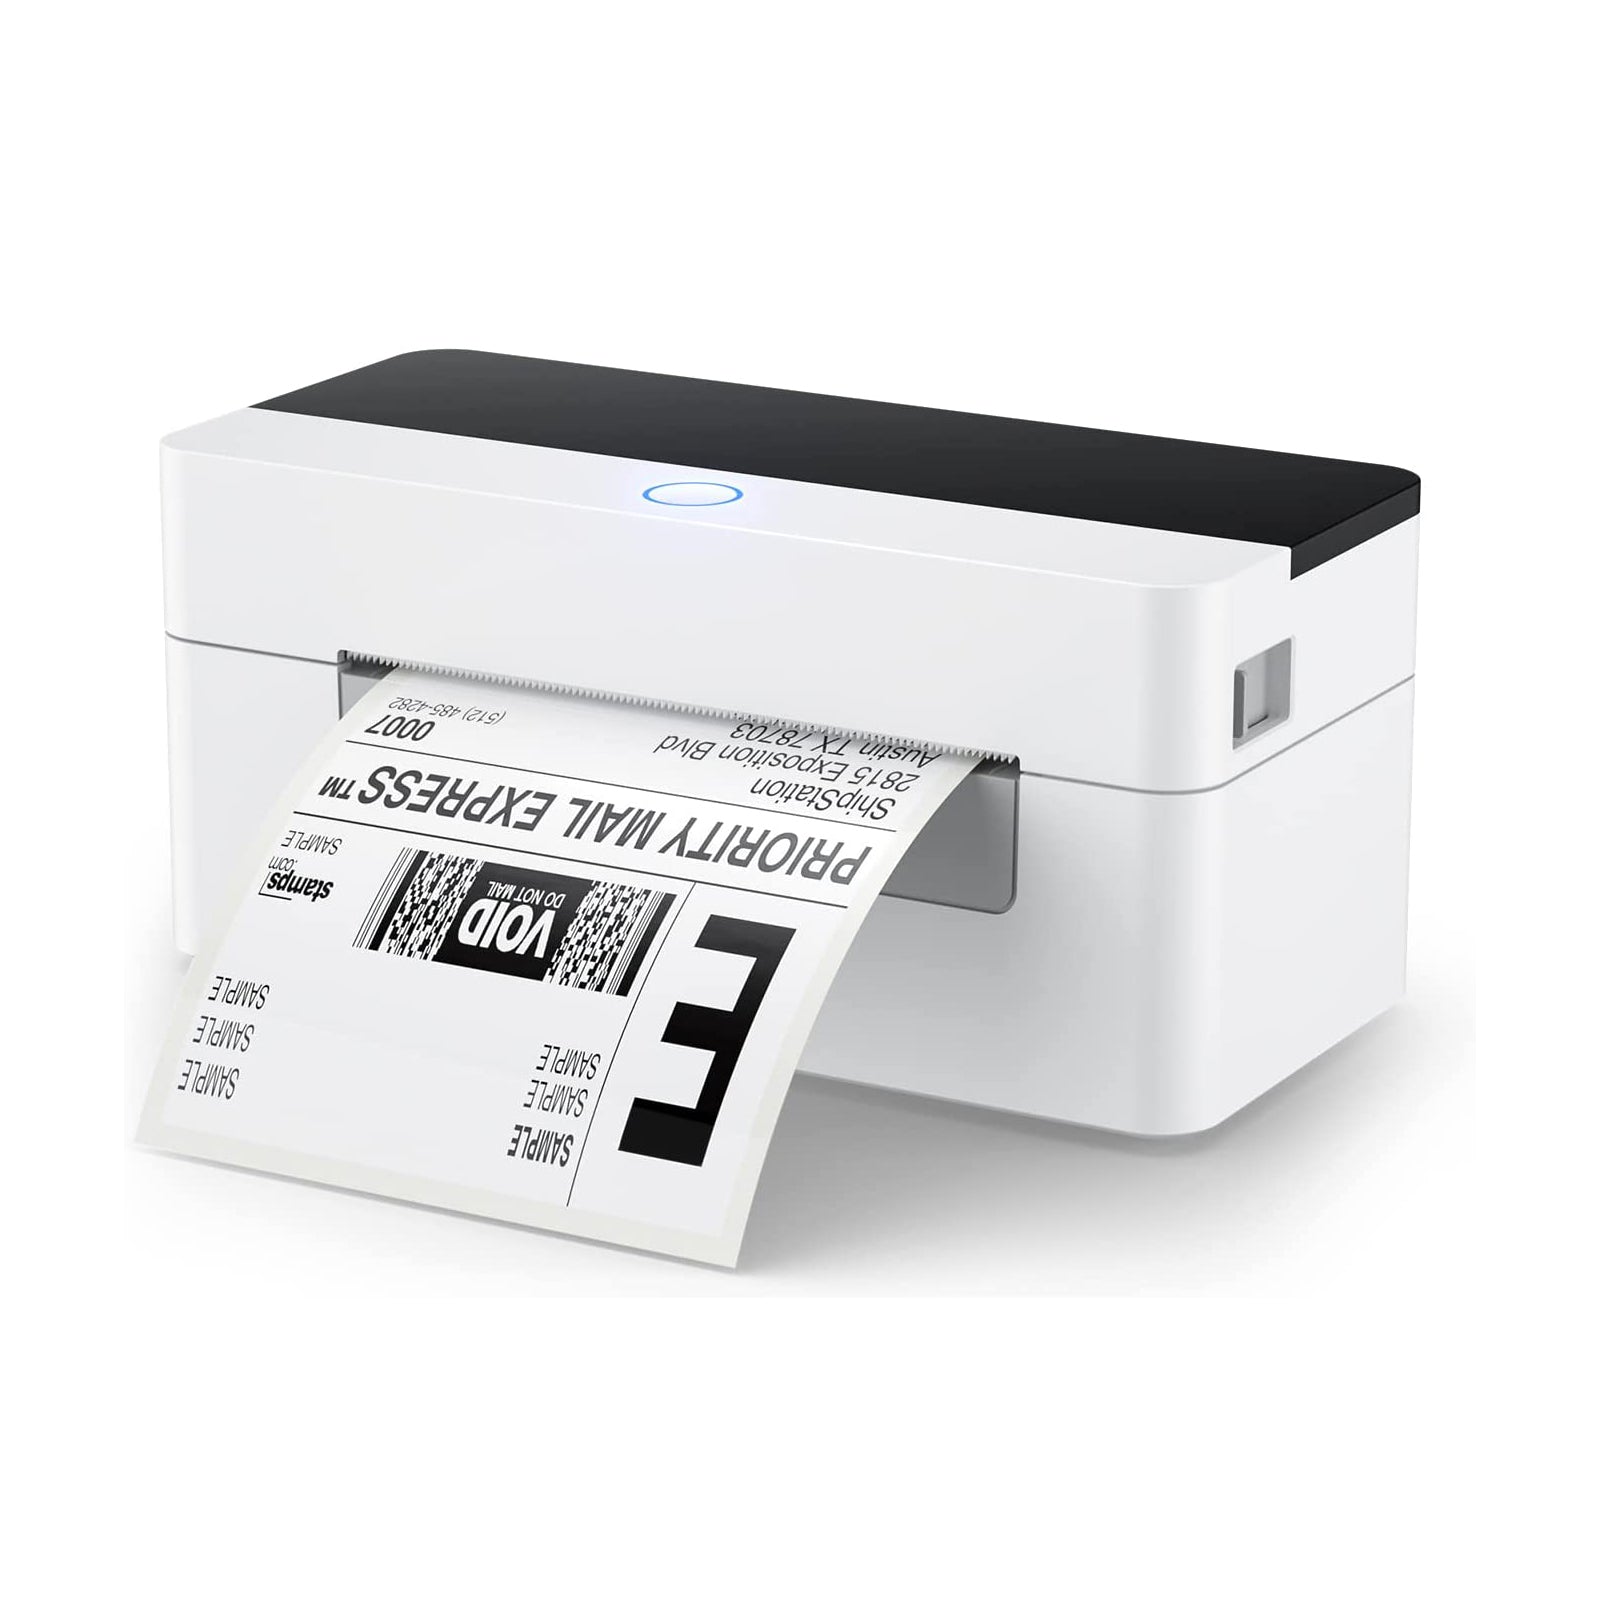 Reliable Wholesale Multi Color Thermal Transfer Printer For All Kinds Of  Users 